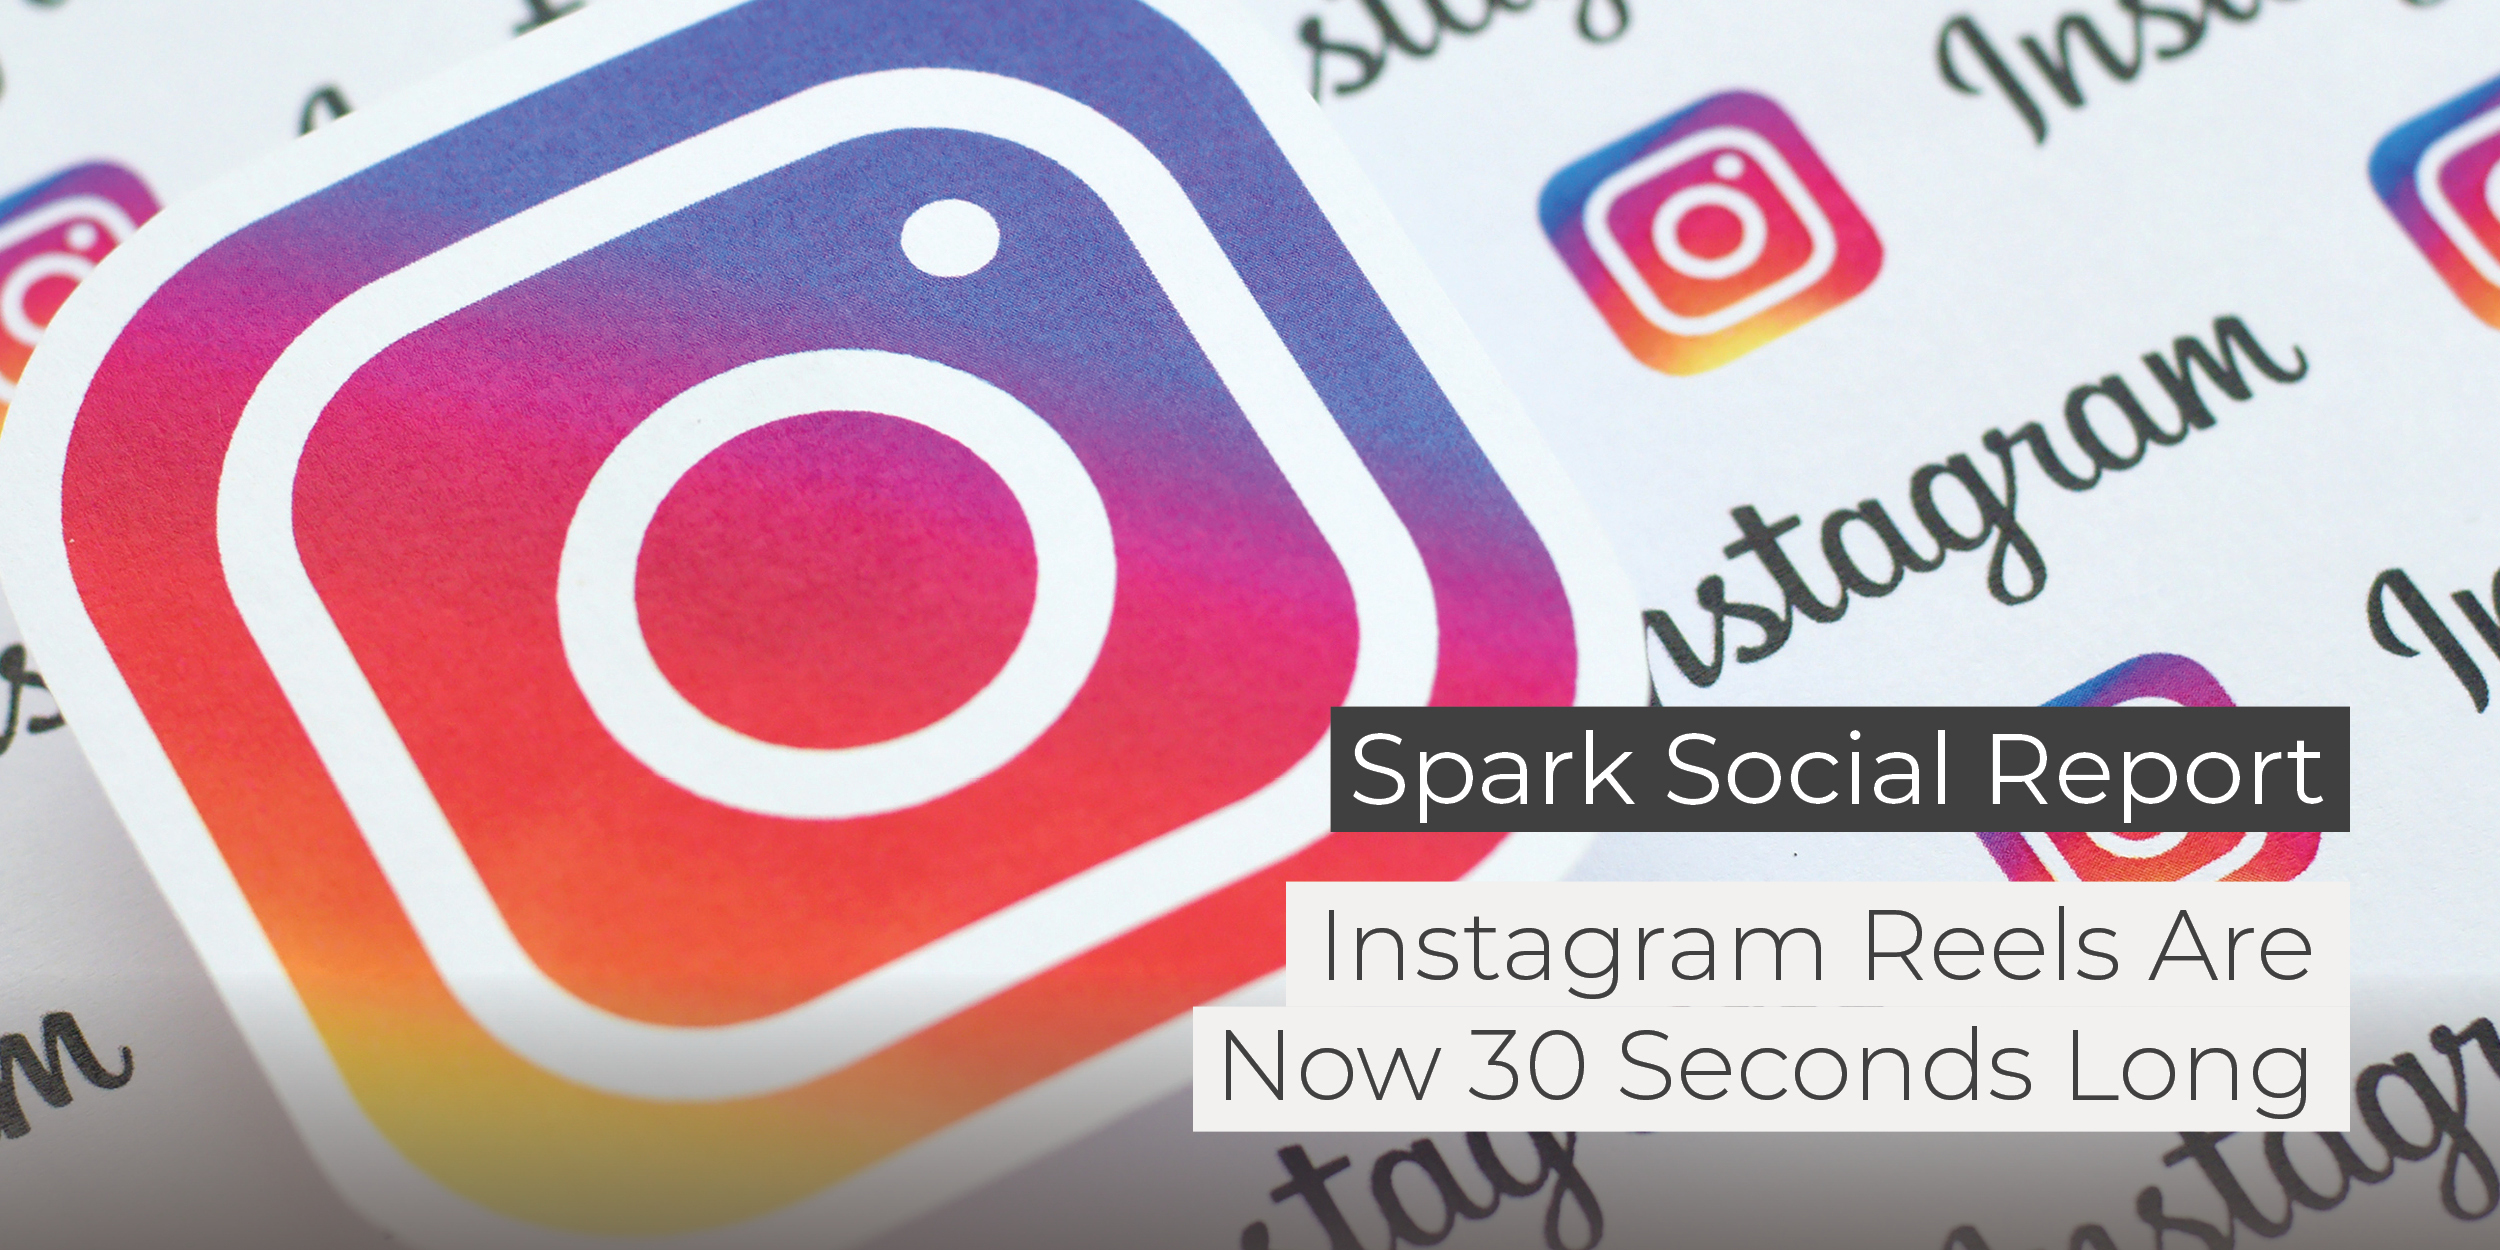 banner of image of instagram logo with text spark social report instagram reels are now 30 seconds long